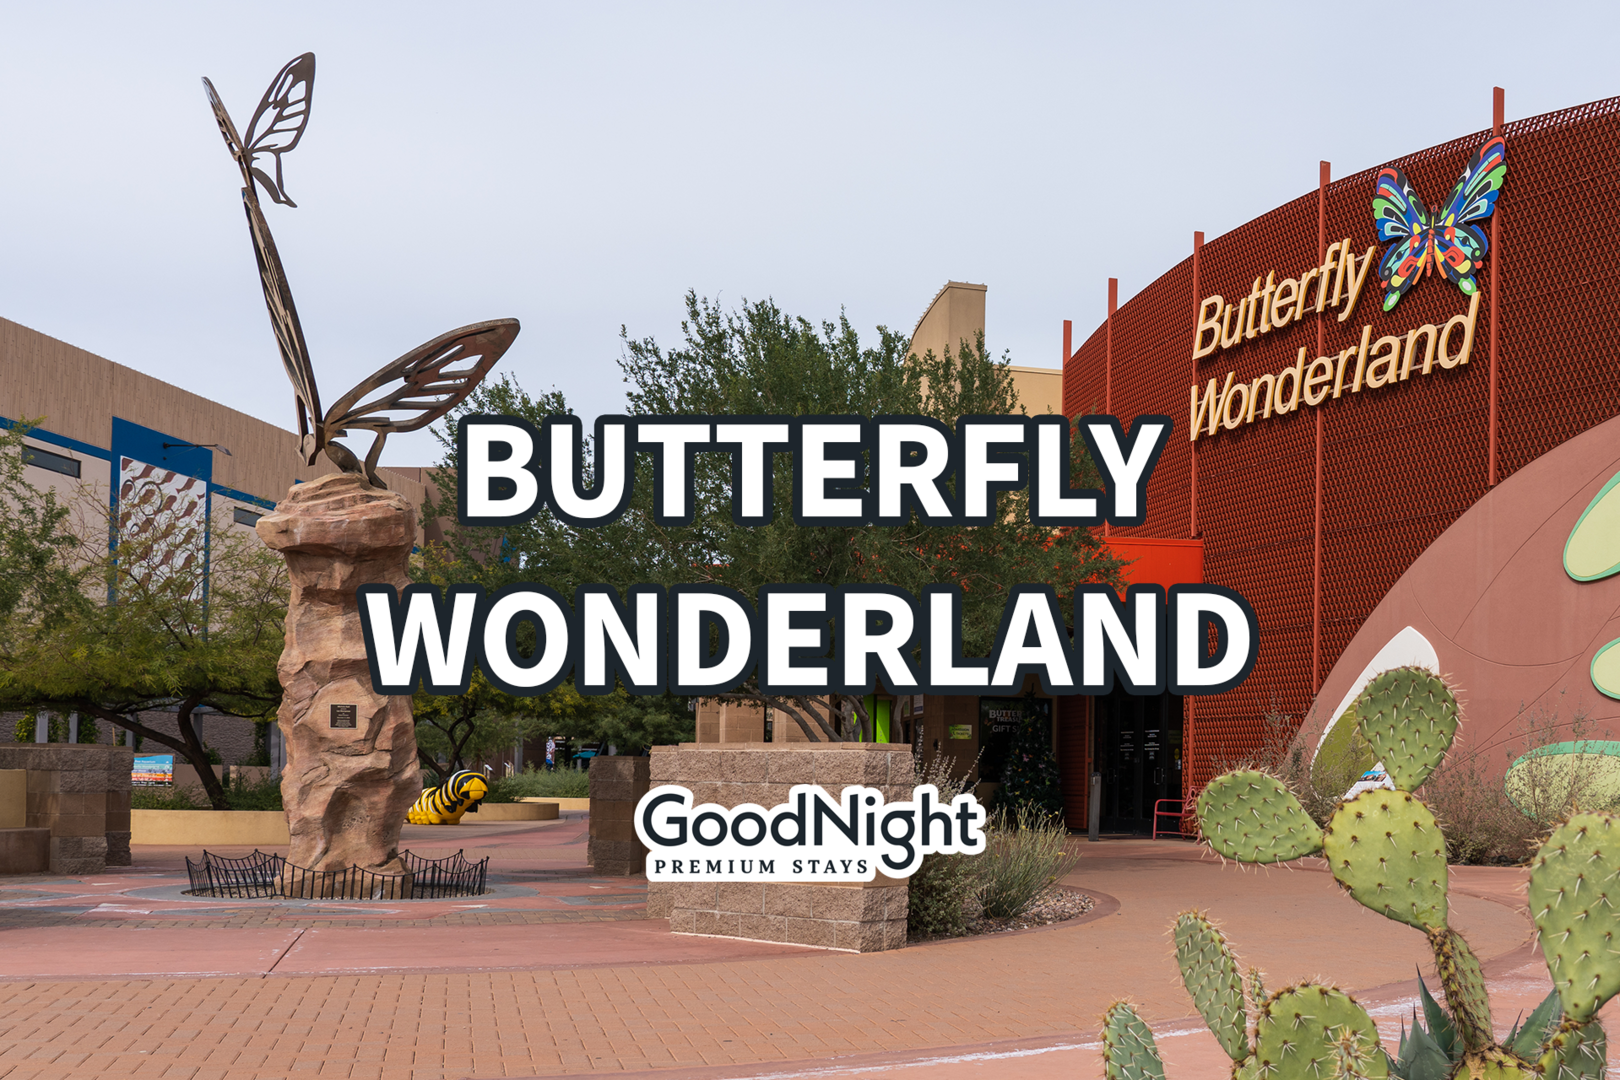 8 mins: Butterfly Wonderland - Largest butterfly conservatory in America!